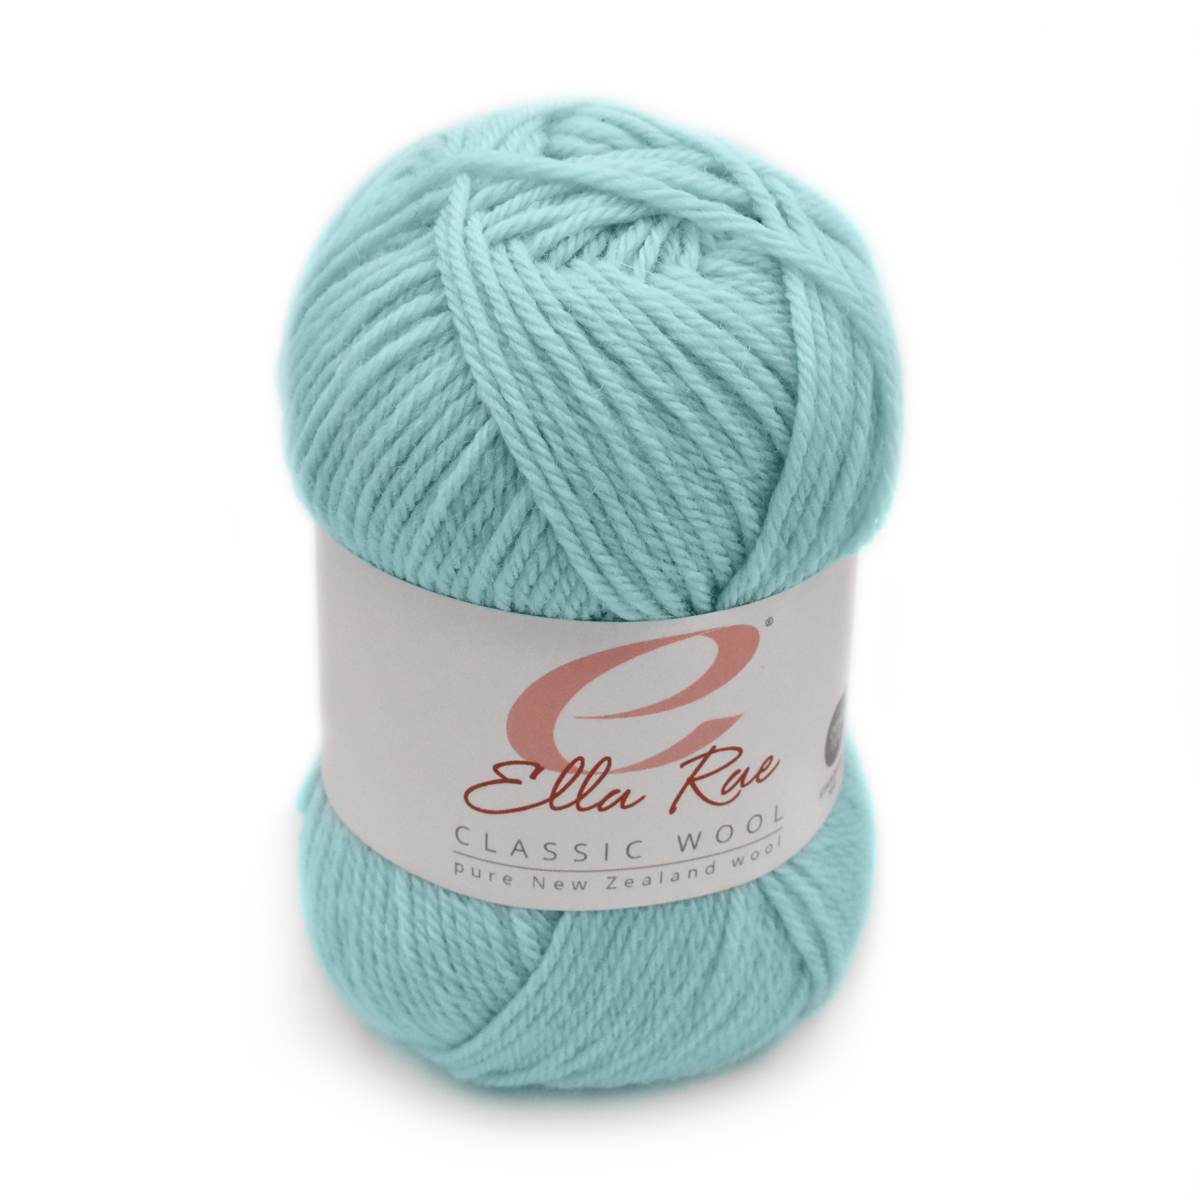 a skein of Classic Wool